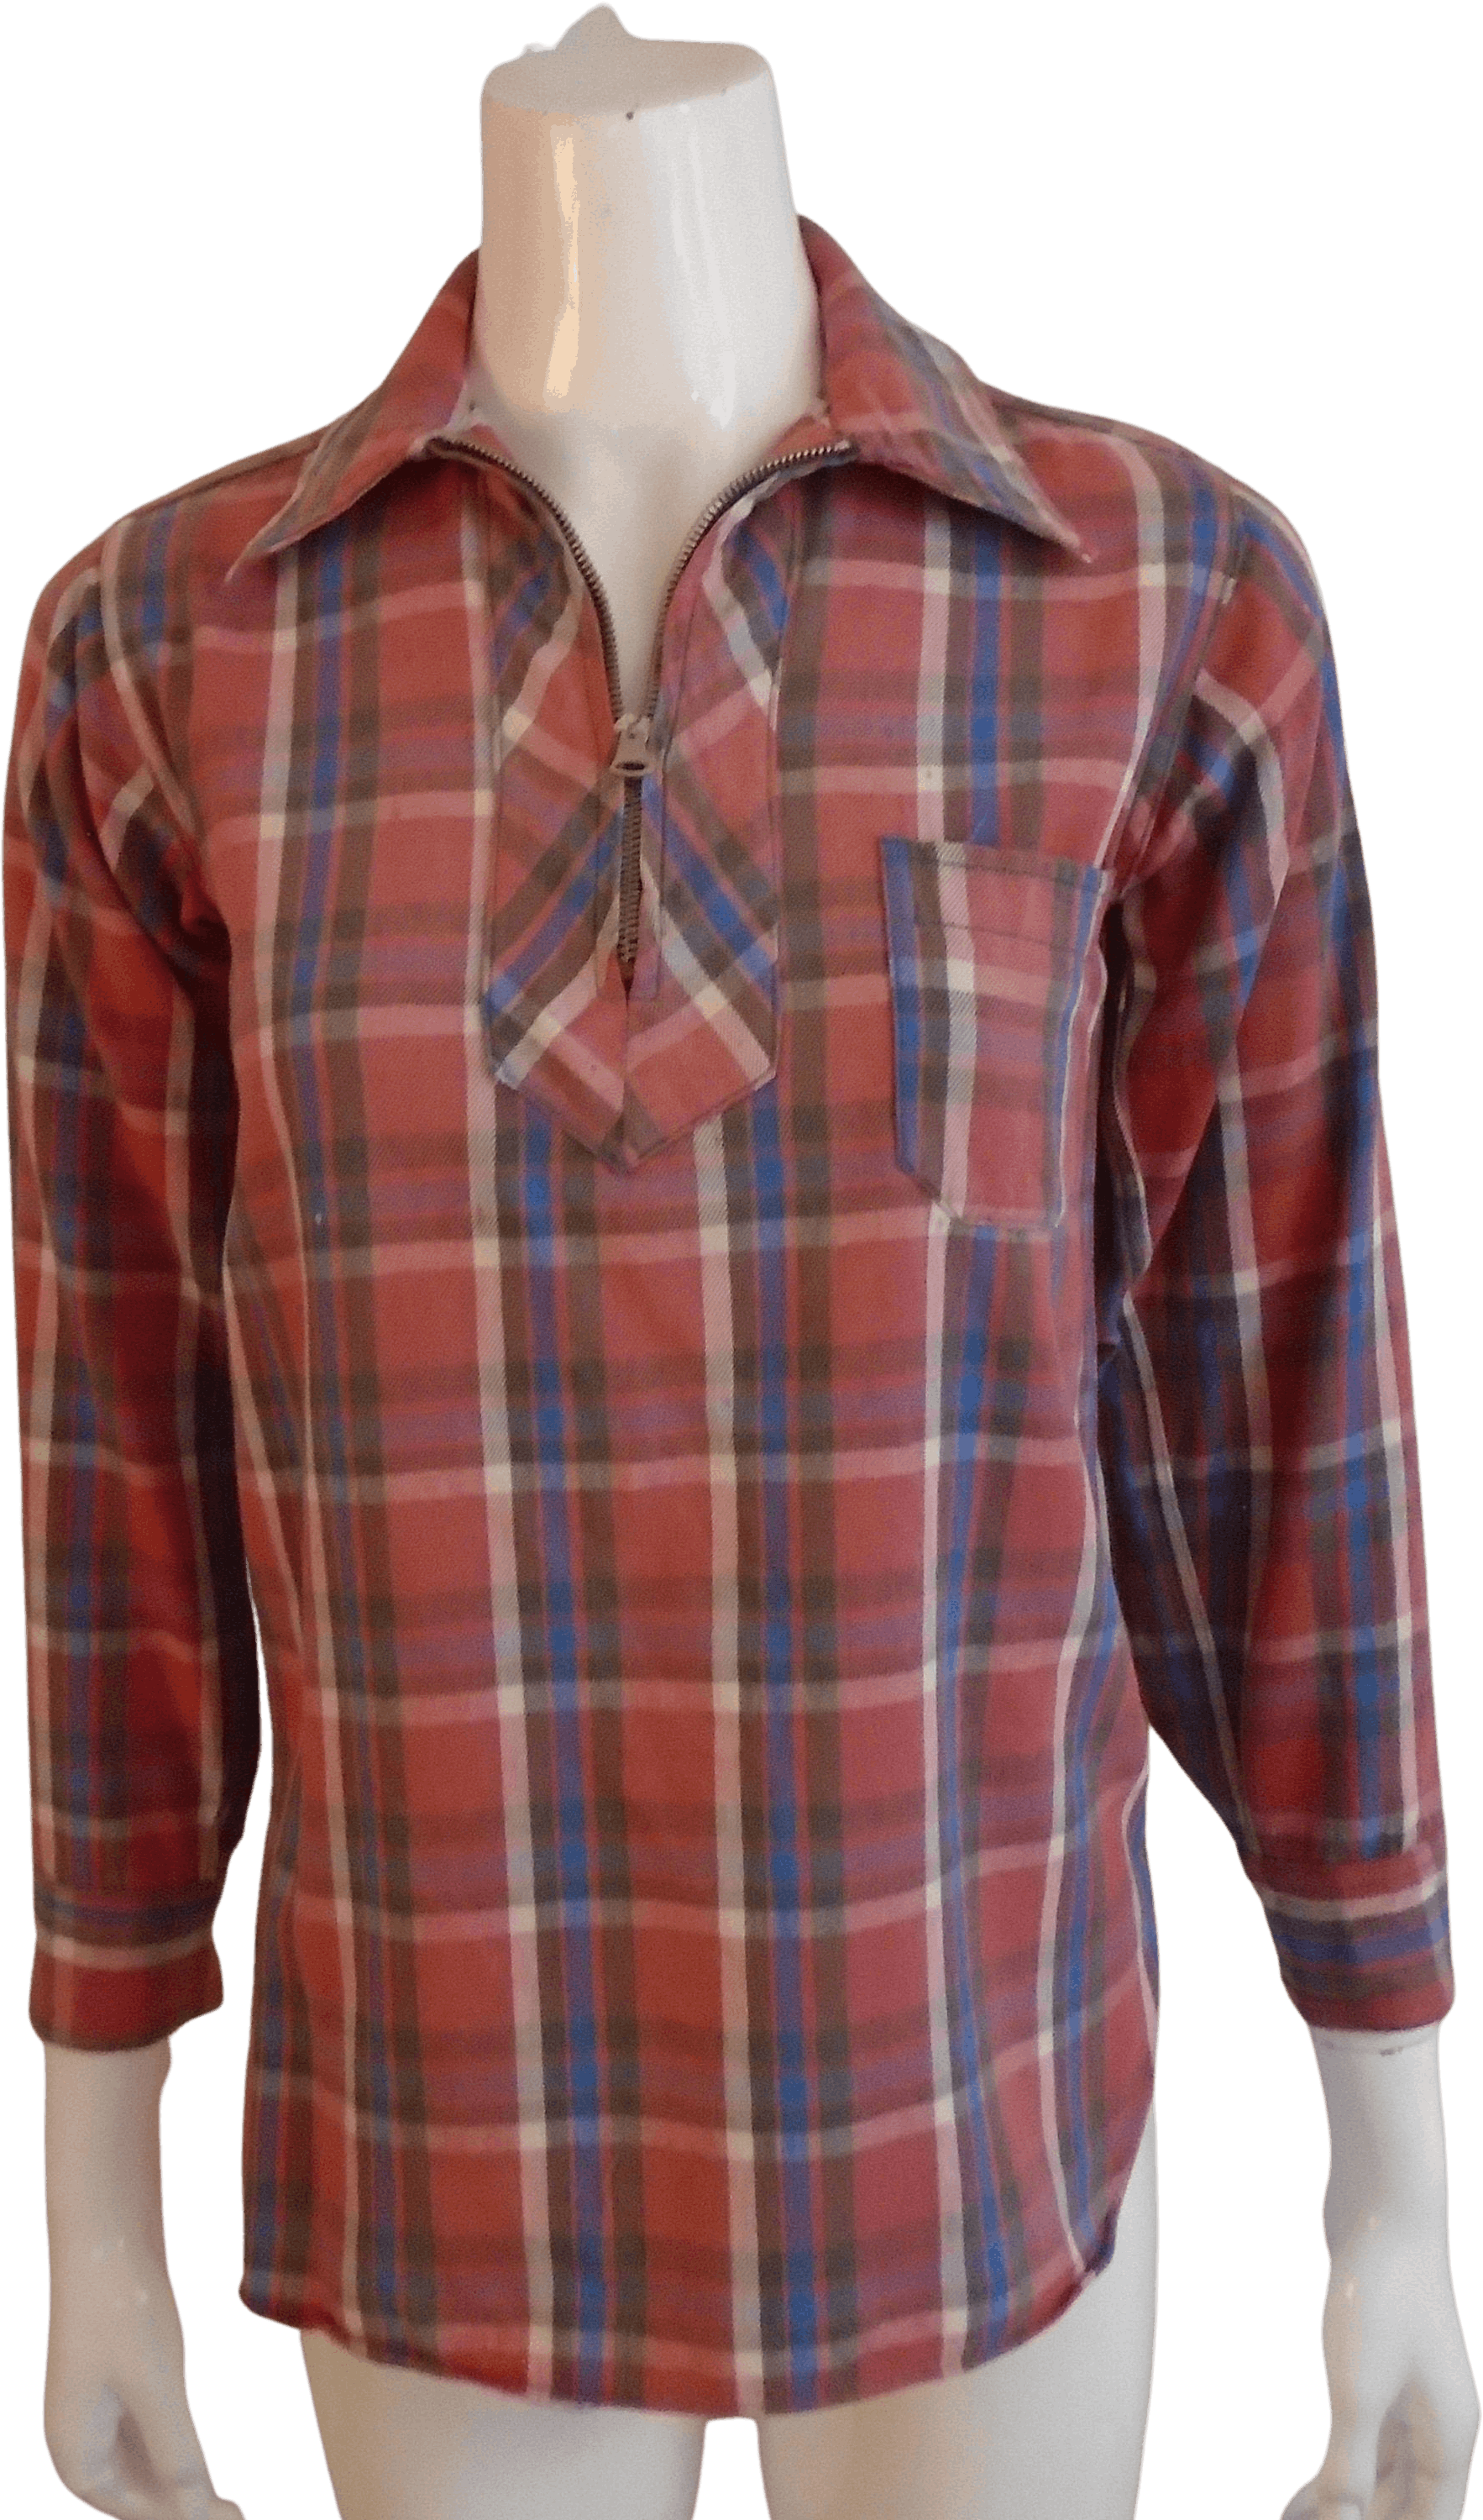 Vintage 50’s Red Plaid Quarter Zip Up Blouse by Two Legs | Shop THRILLING